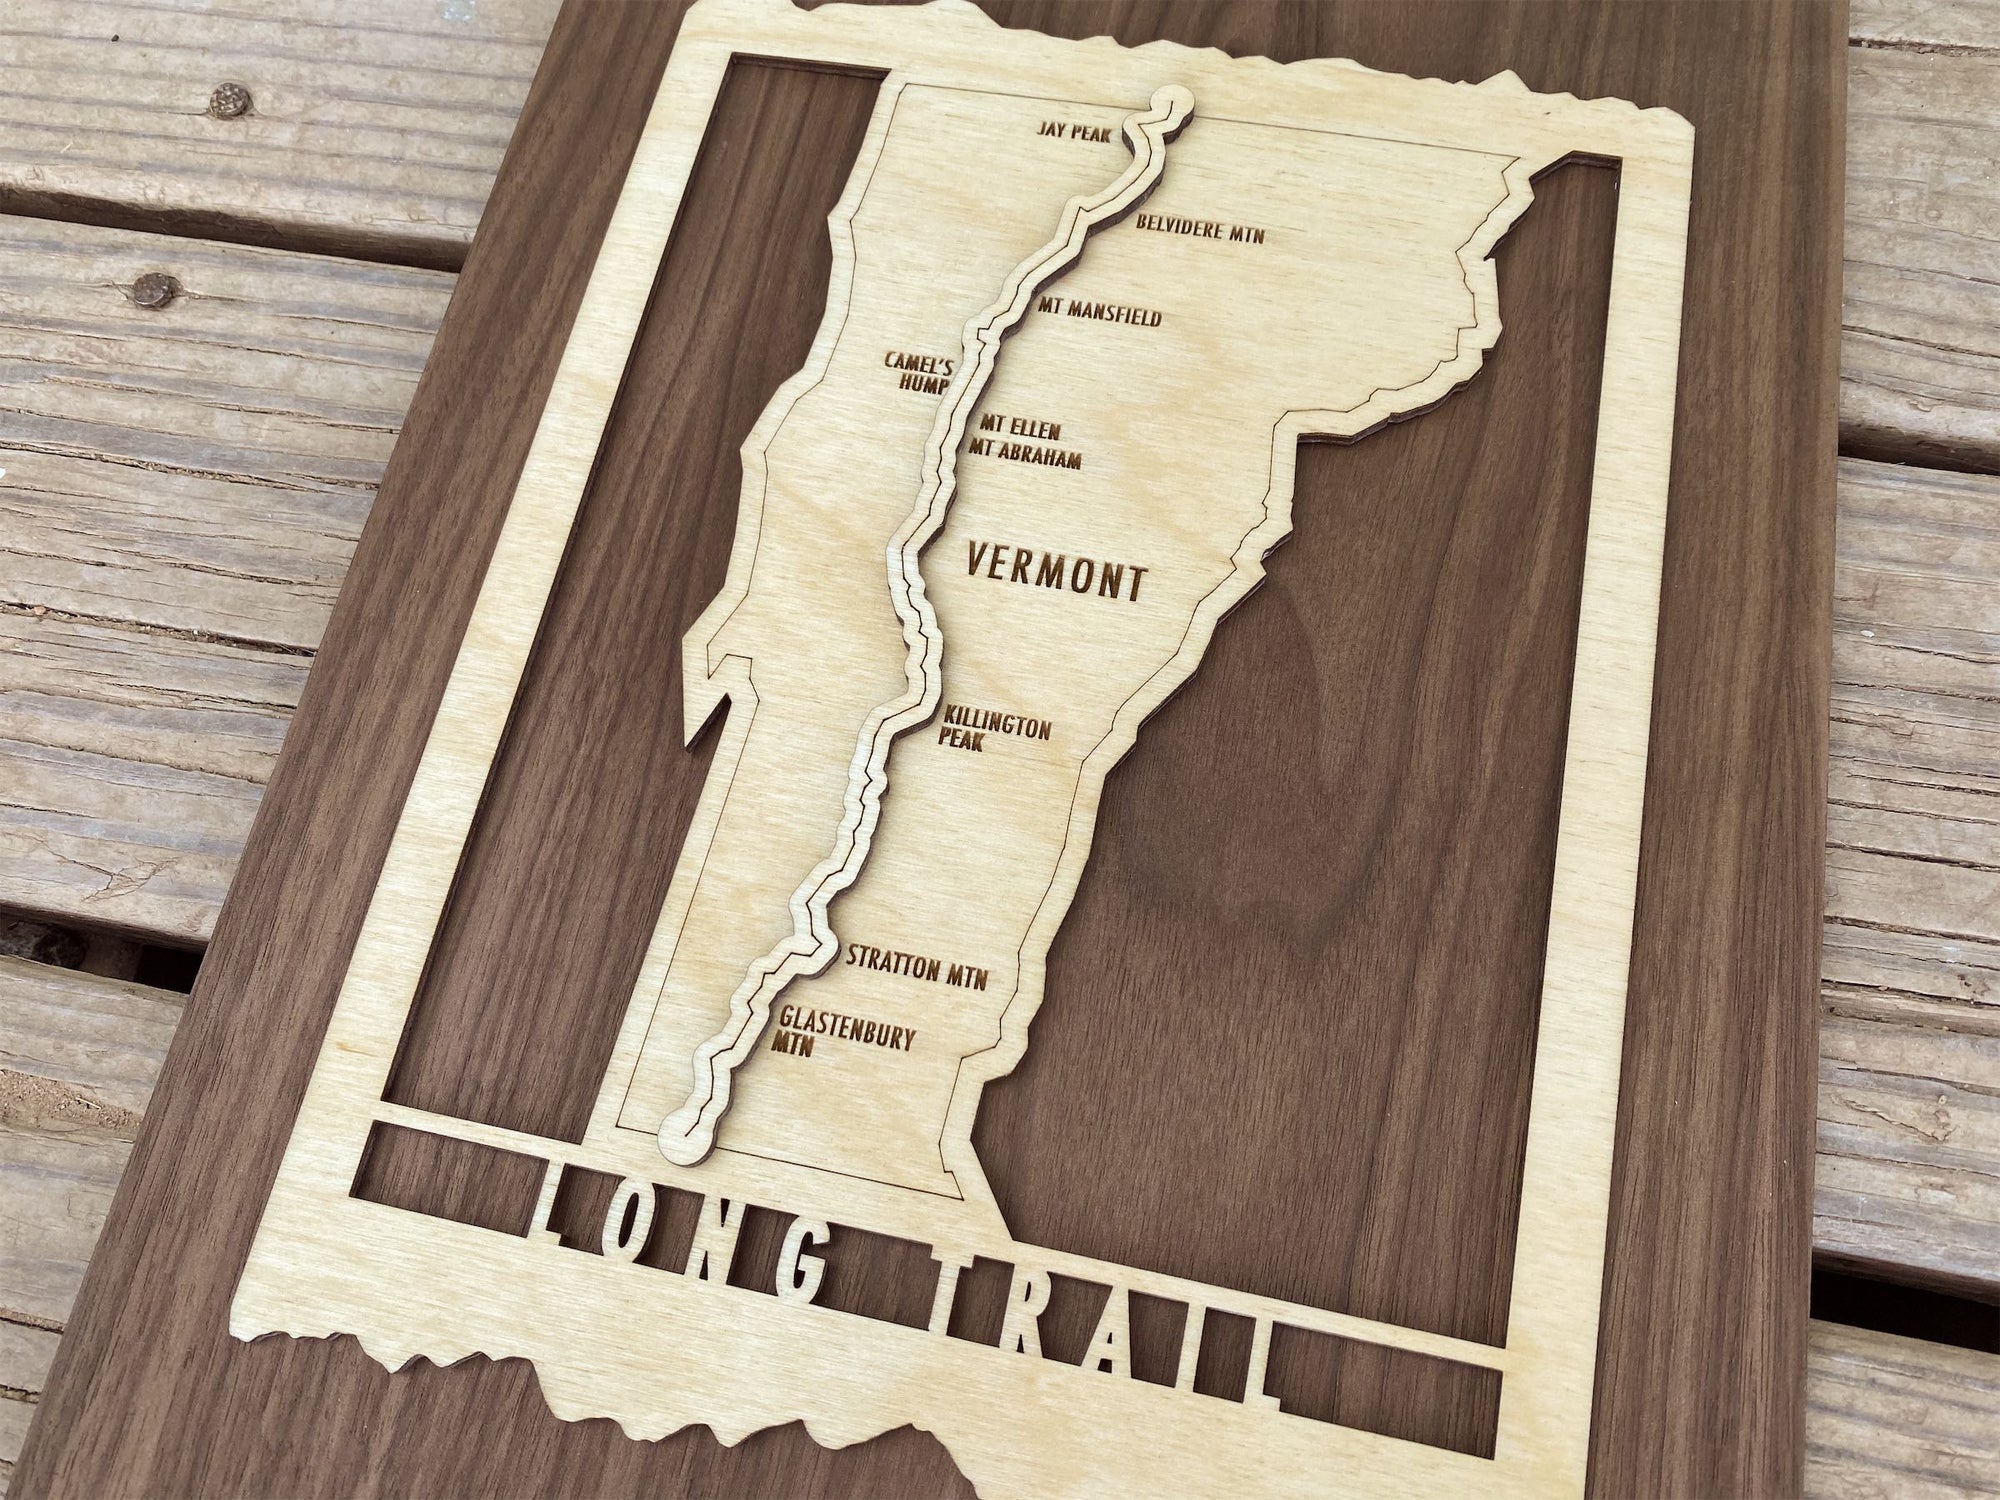 Vermont Long Trail Map - Wood cut map of Long Trail Gift for Hikers